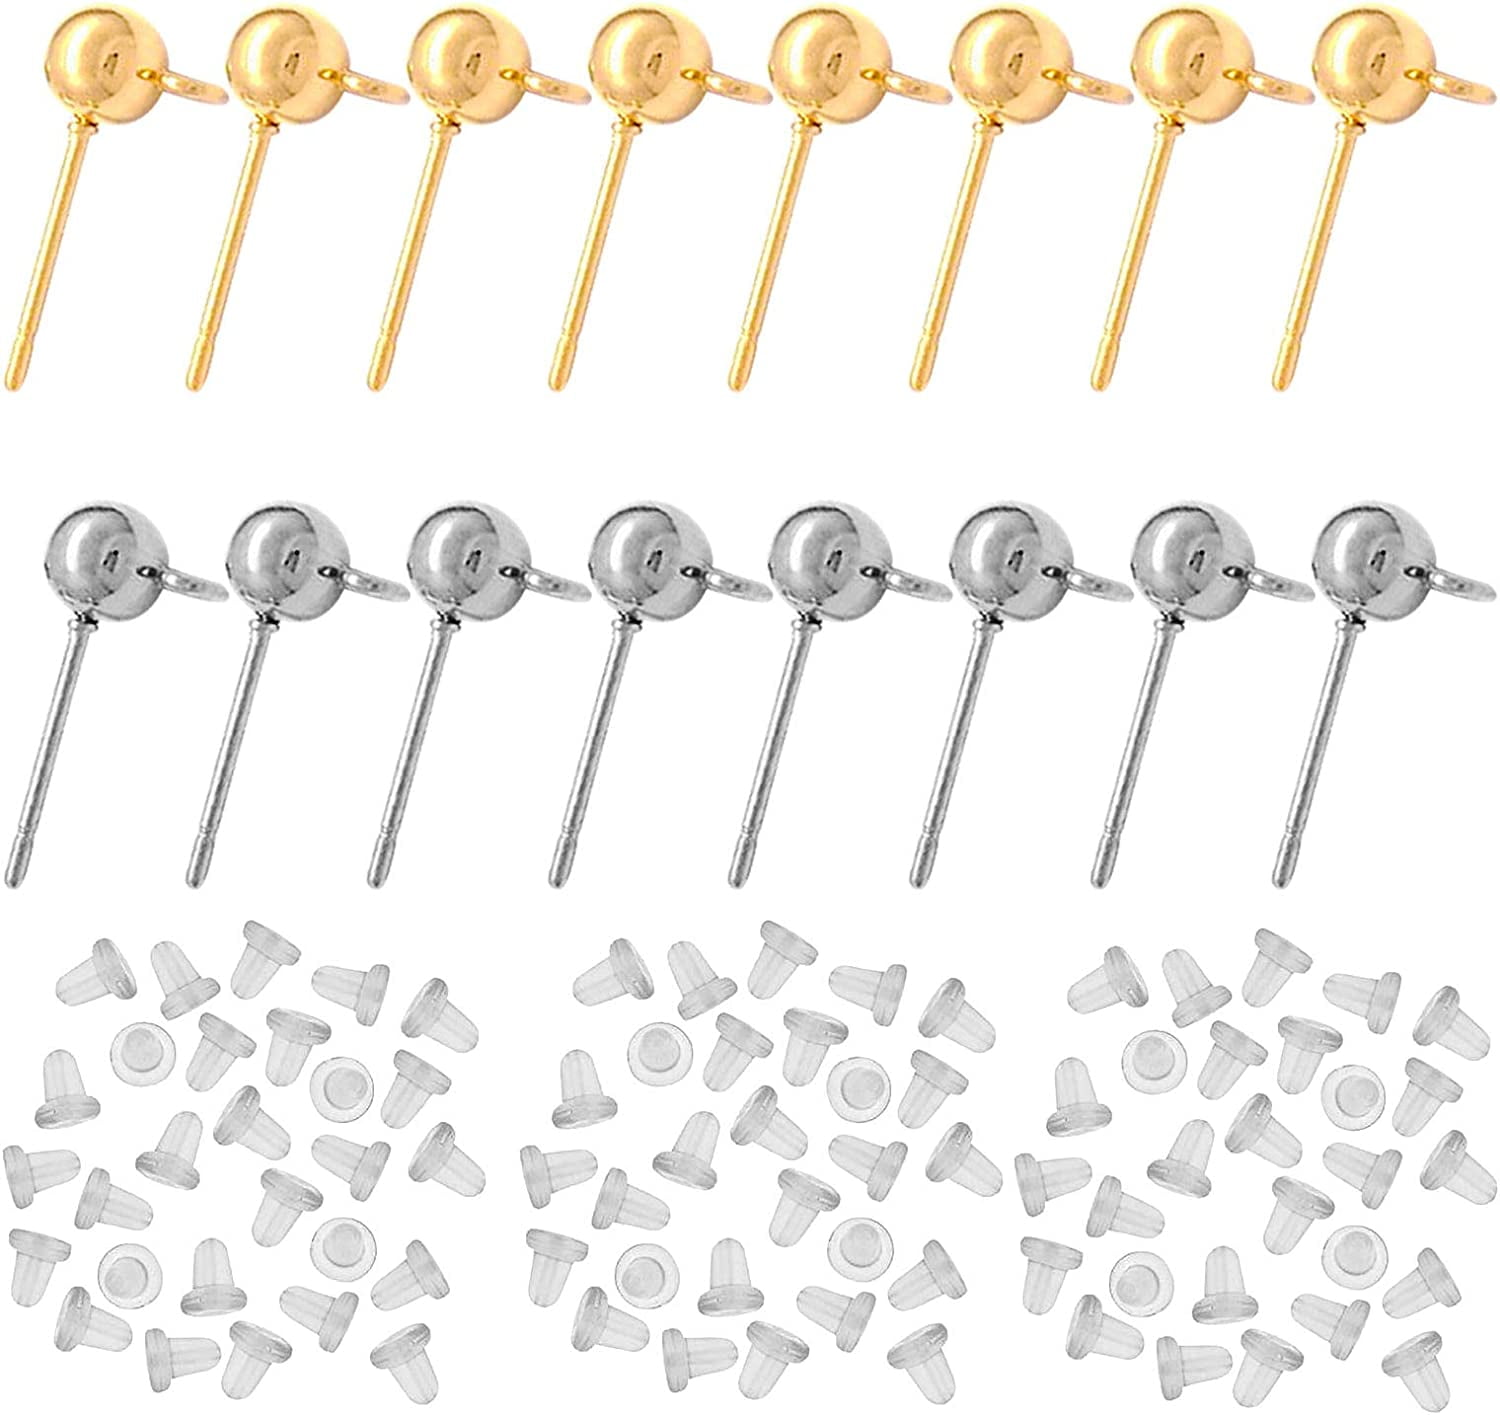 Amazon.com: HINZIC 20PCS Earring Backs for Studs Silicone Earring Backs  Earring Backs for Droopy Ears Earring Backing Replacement in 5 Colors